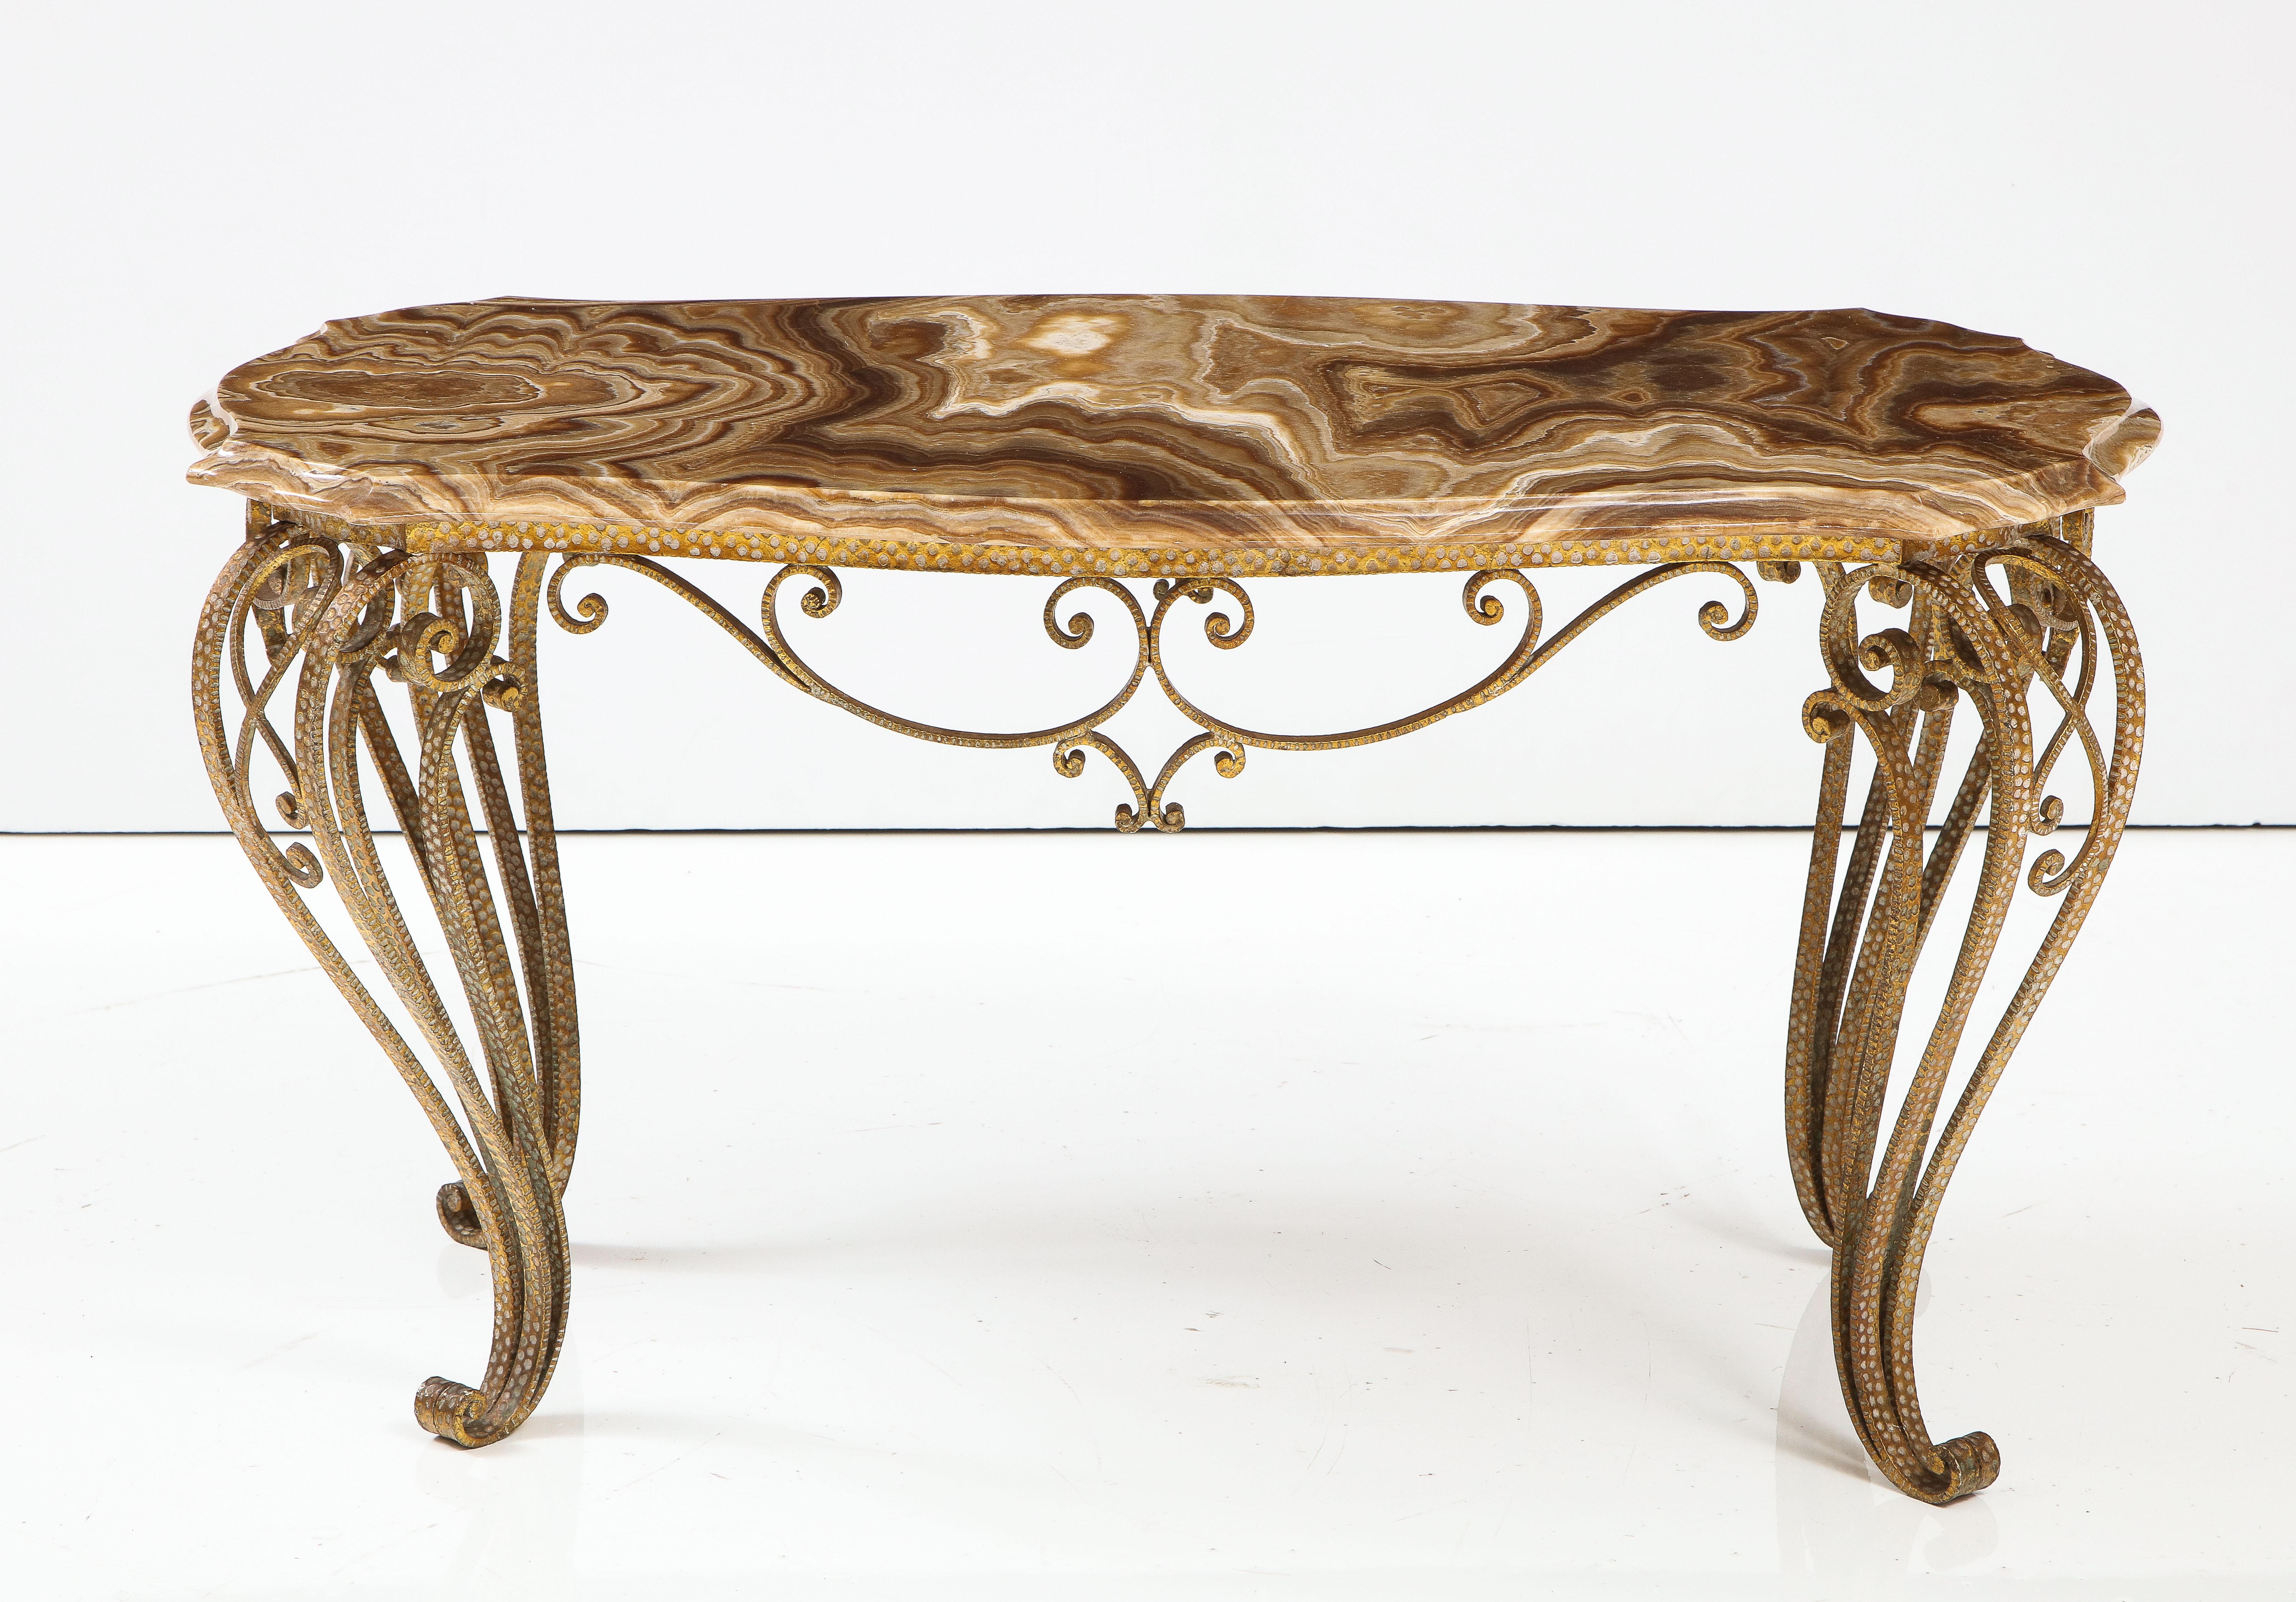 A fanciful gilded iron coffee table with intricately hammered details, the apron with foliate and scroll motif and elegantly appointed cabriole legs, support the shapely exquisite hand beveled agate top. A superb piece designed by Pier Luigi Colli,